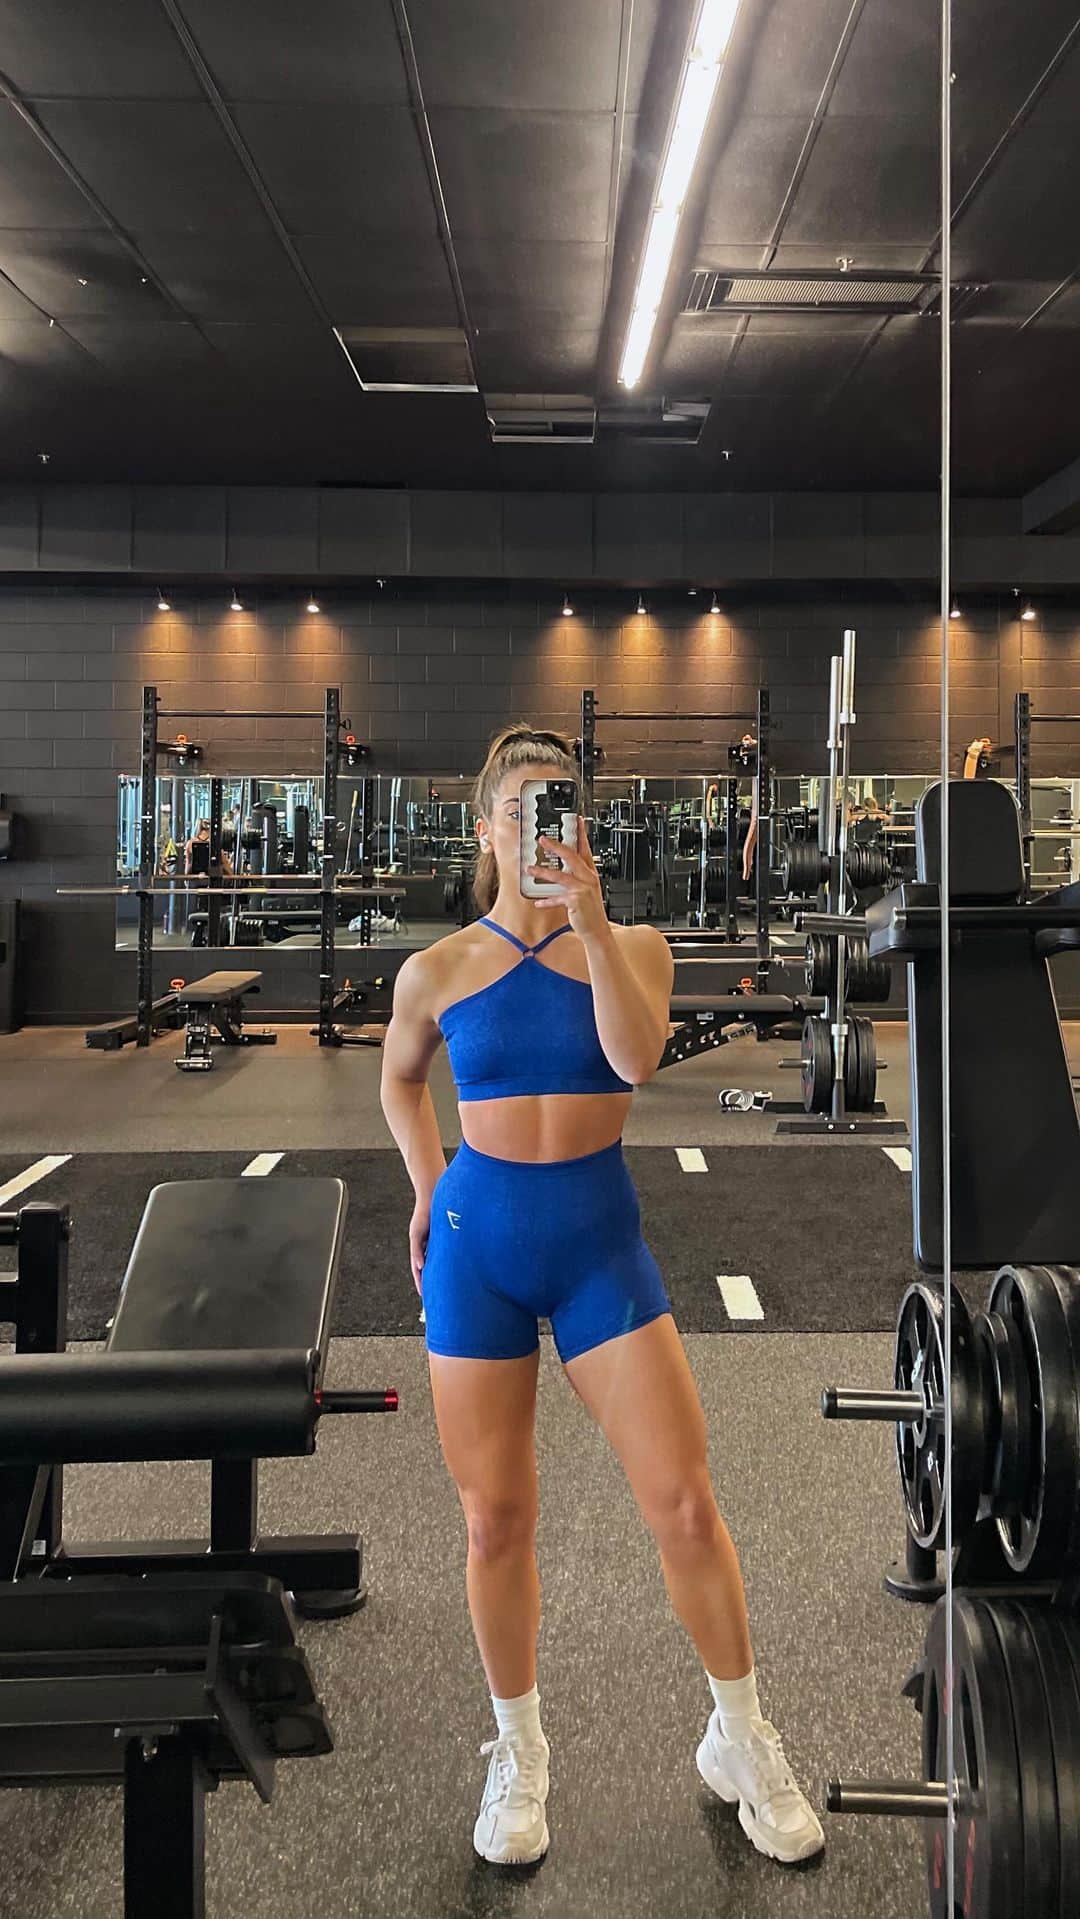 Paige Reillyのインスタグラム：「Another leg dayyy 🦋💙🫐🐬 Full workout listed down below!⁣ ⁣ * Hip thrusts: 4 x 6-10⁣ * DB sumo squats: 4 x 8-10⁣ * DB RDL’s: 4 x 8-10⁣ * Smith machine squats: 3 x 10 (coming to a full stop / pause at the bottom)⁣ * Smith machine reverse lunges (front foot elevated): 3 x 10 each leg⁣ ⁣ ♡ Outfit: @gymshark 🥲⁣ AND I’m so excited to share that I am officially working with Gymshark & you can use code “PAIGER” for 10% off your order 🥹💕 ⁣ ⁣ ⁣ #fitnessworkouts #gymmotivation #gymfit #gymsharkwomen #gymshark」